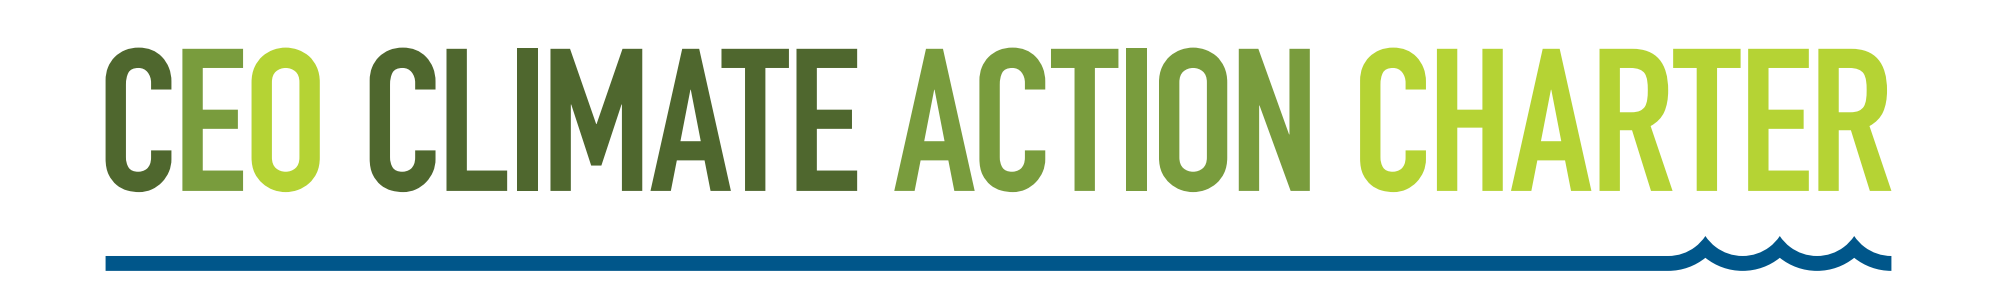 CEO Climate Action Charter banner image or logo